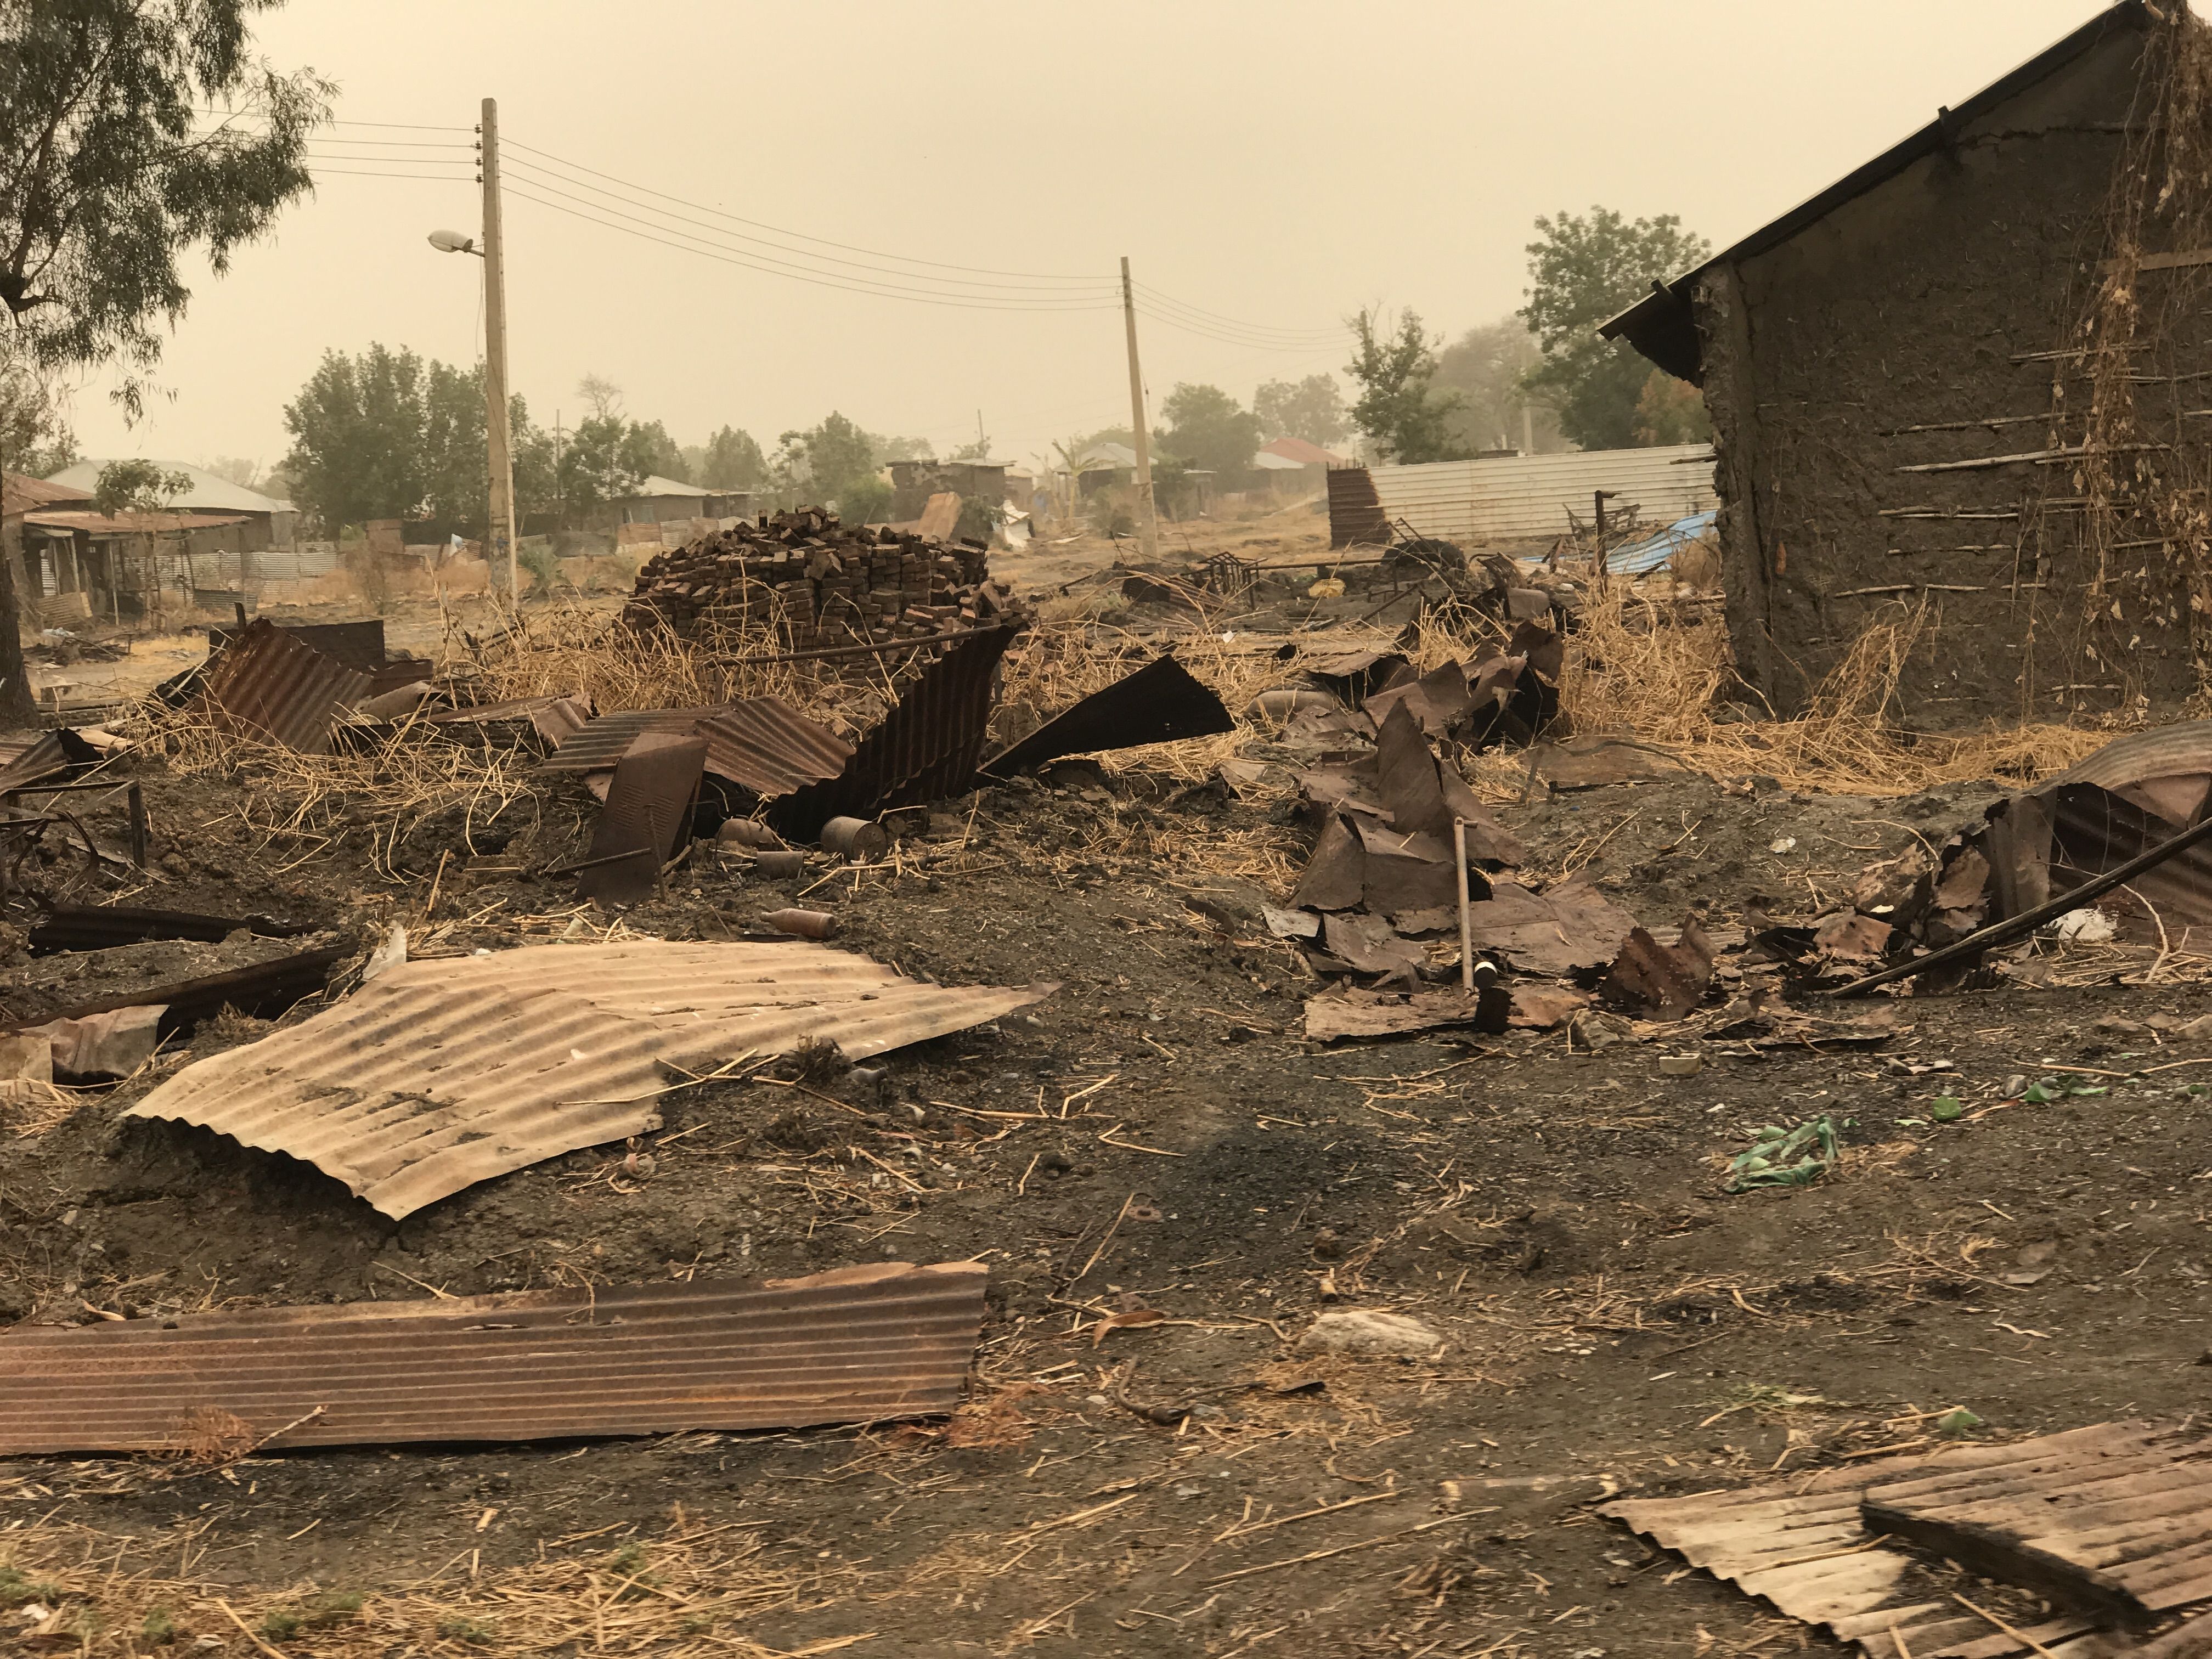 Destruction in Malakal. Malakal saw some of the worst violence of the war and has experienced ethnic cleansing. These neighborhoods are completely abandoned. Image by Jane Ferguson. South Sudan, 2017. 
